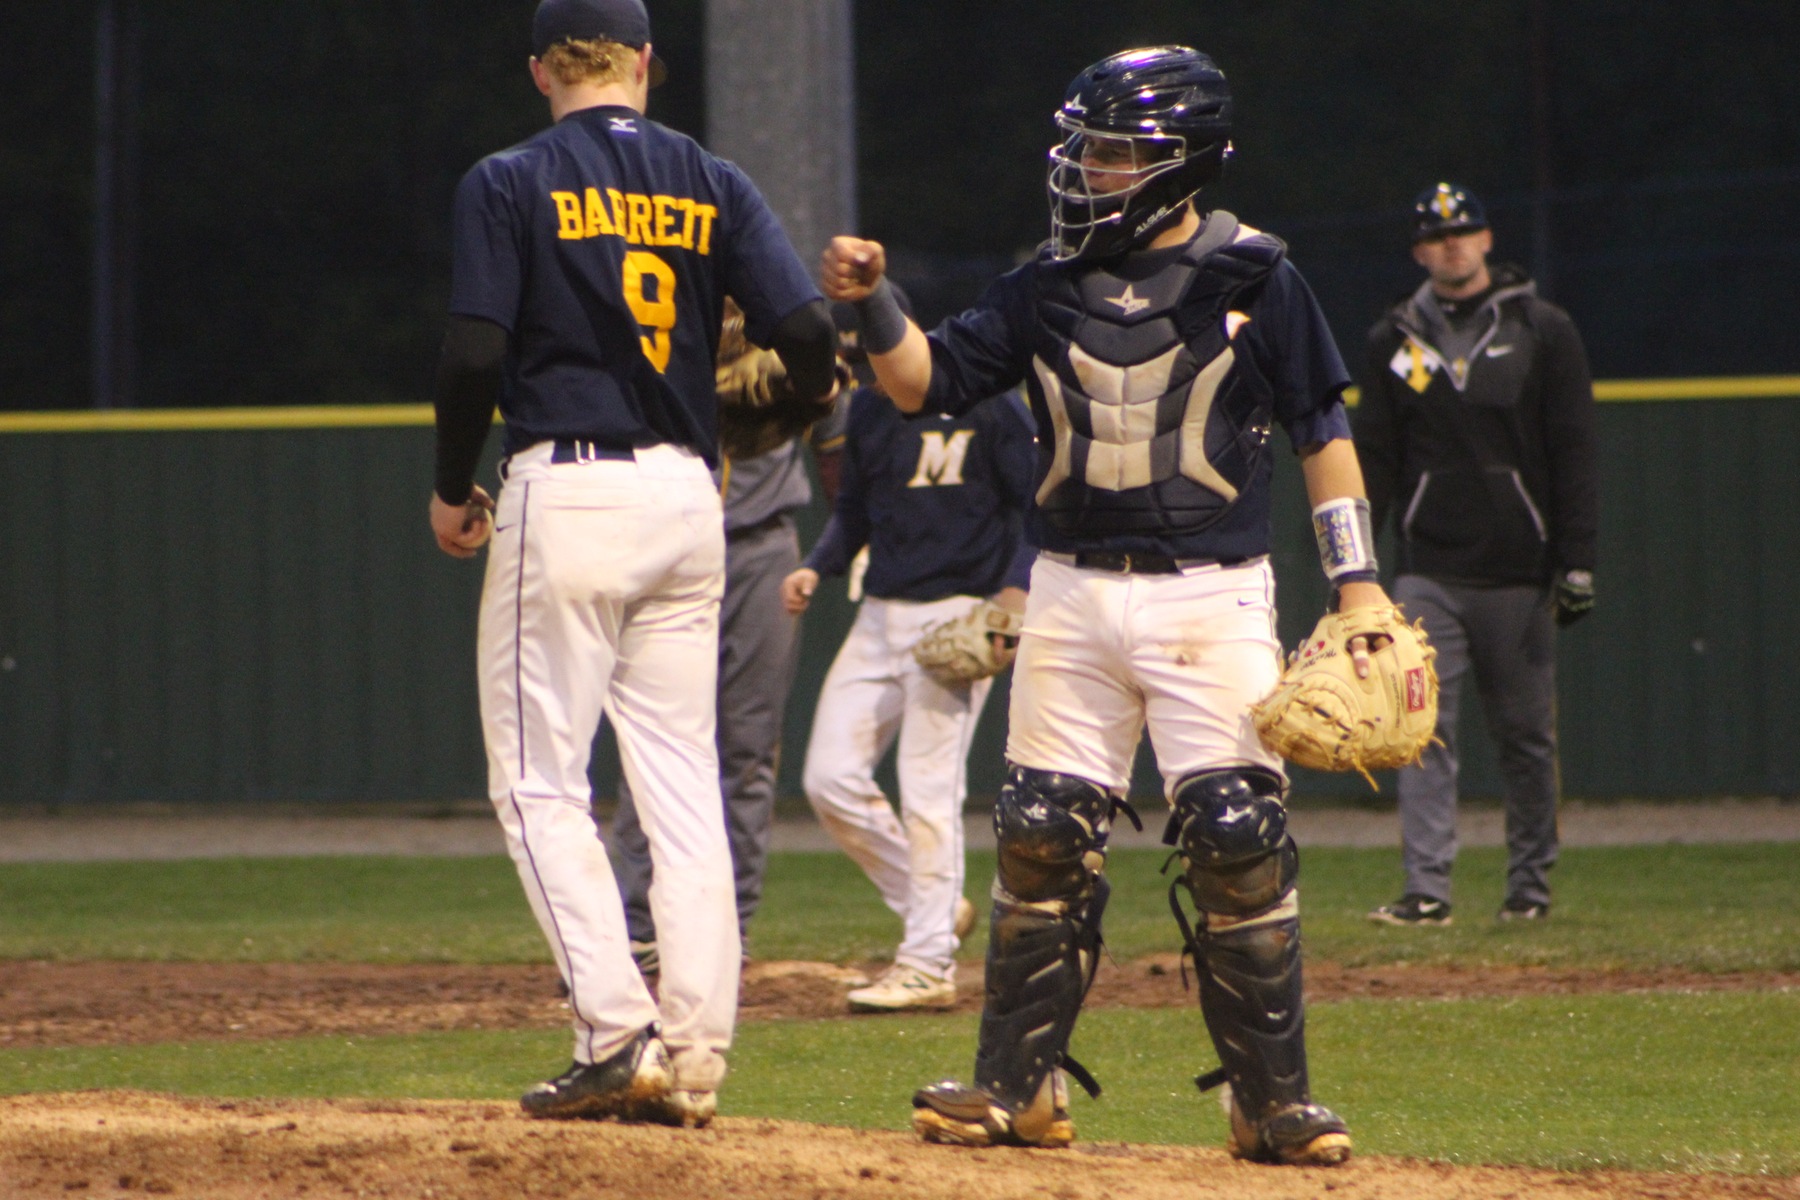 MCC baseball swept Indian Hills CC in Centerville on Friday night